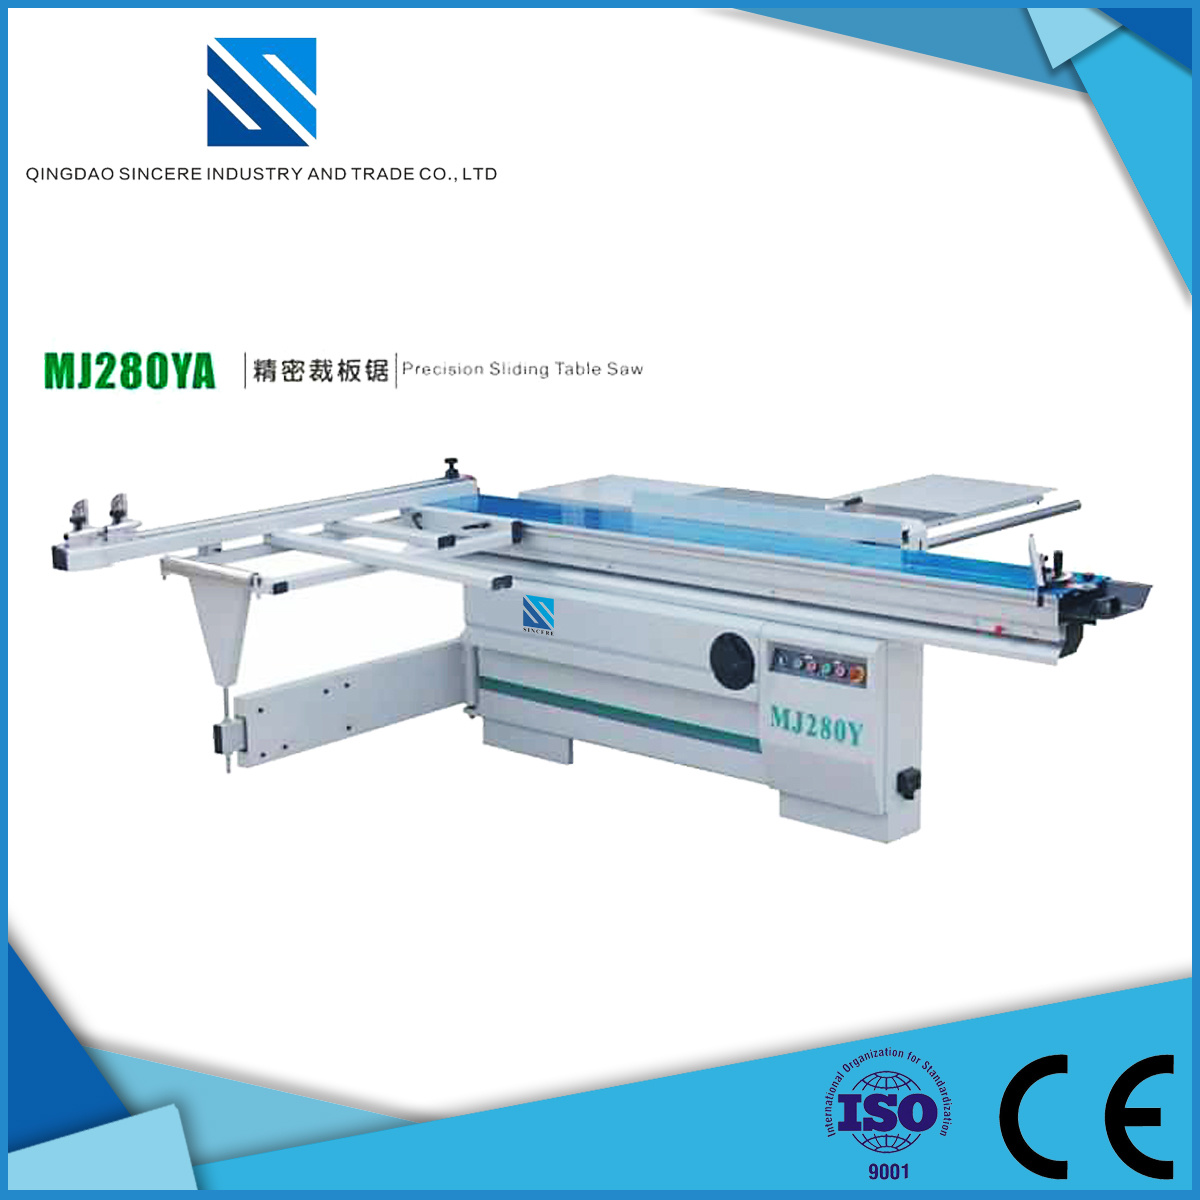 Factory Outlet Quality Guaranteed Precision Sliding Table Saw